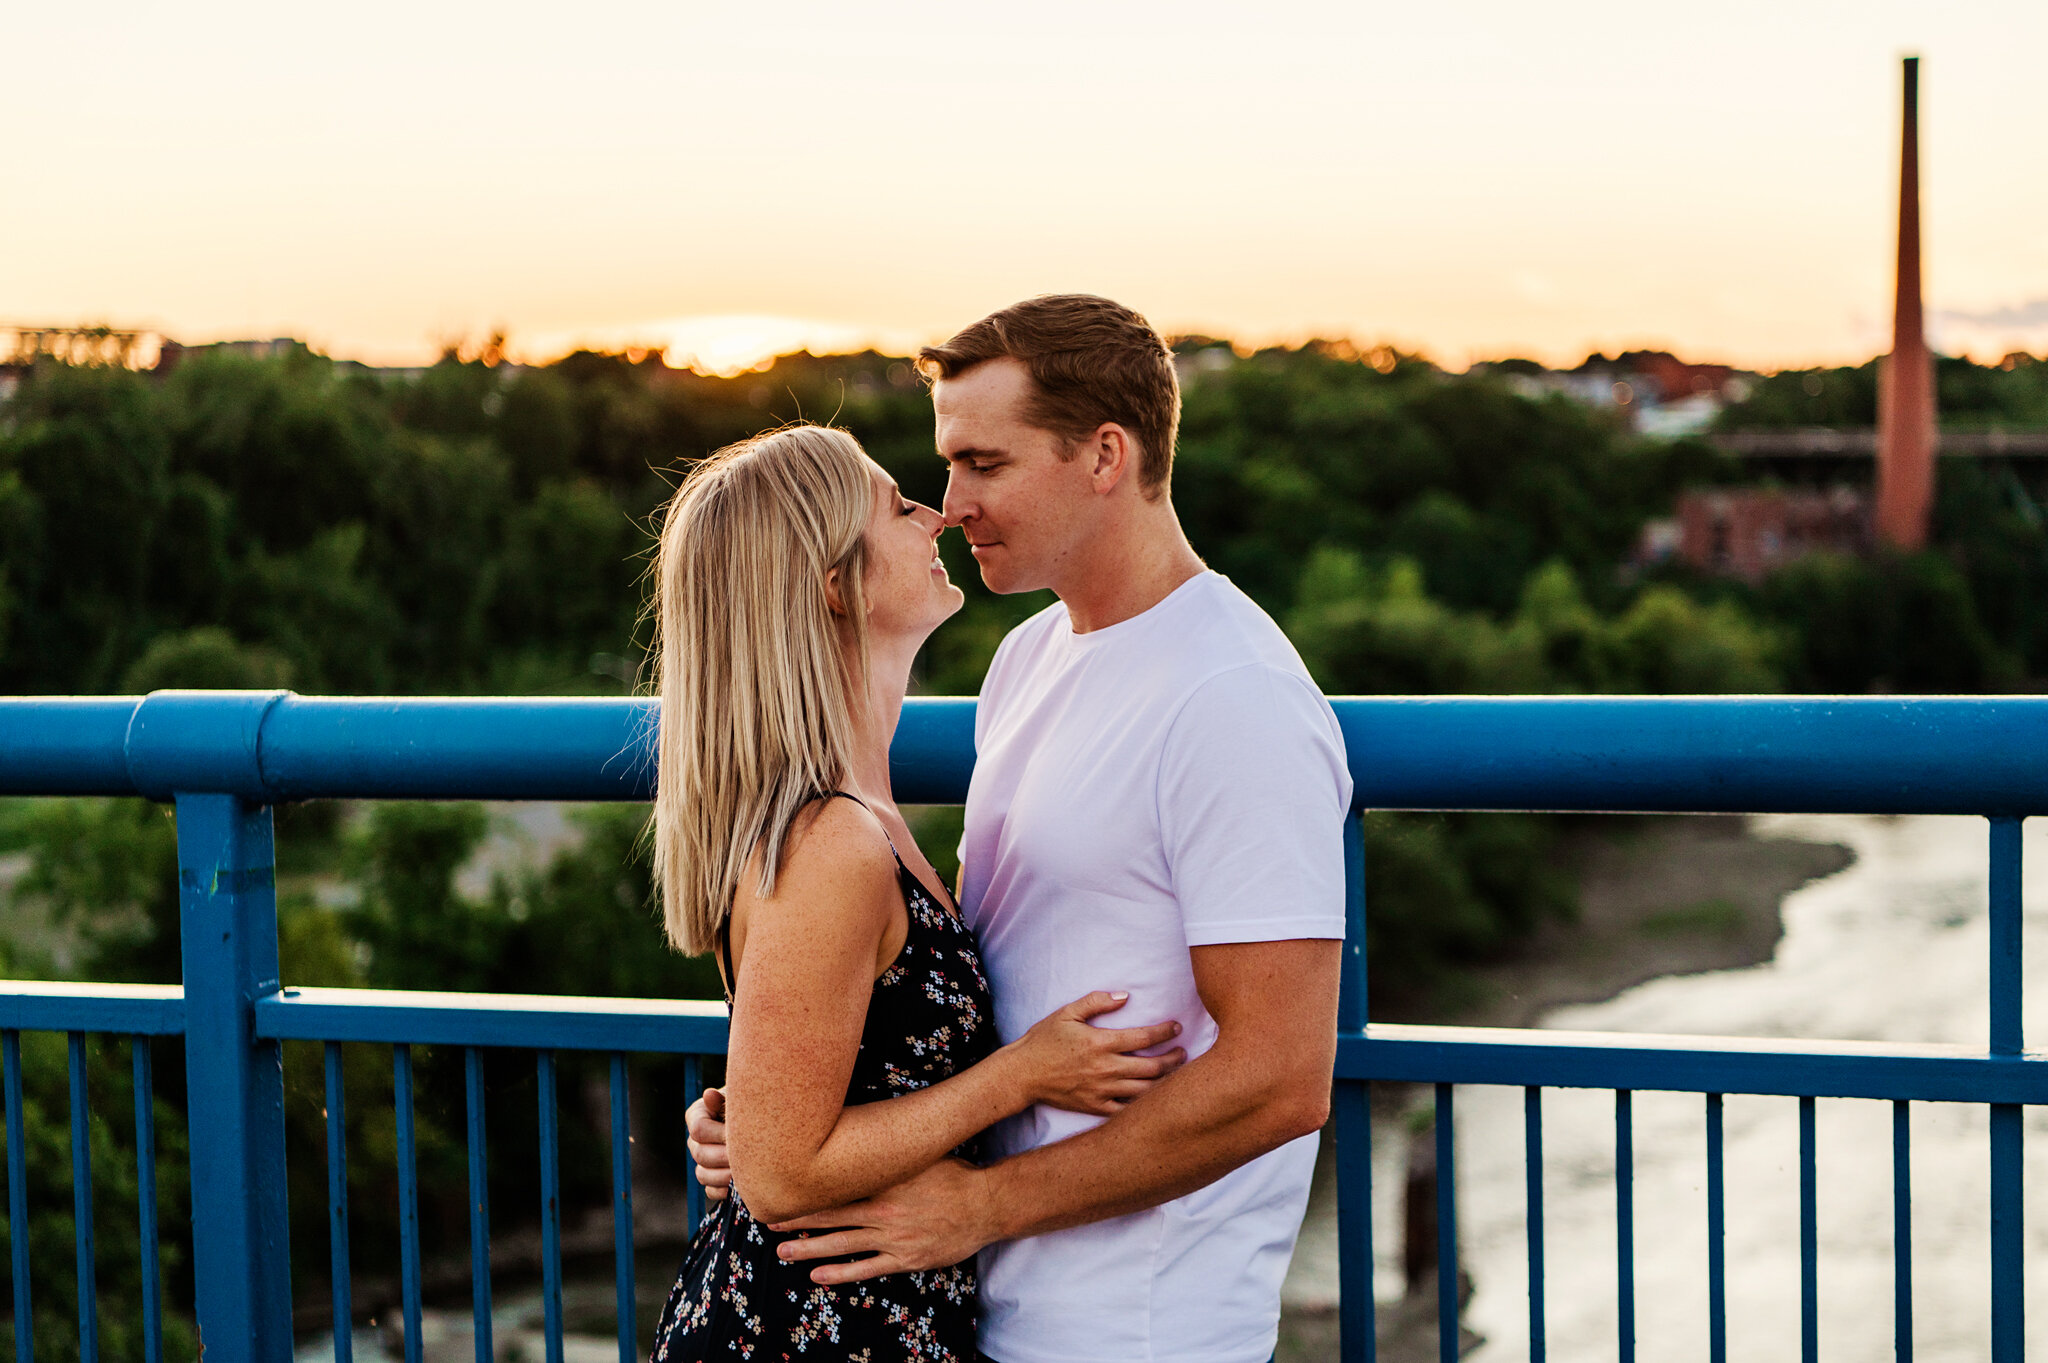 Genesee_Brew_House_High_Falls_Rochester_Engagement_Session_JILL_STUDIO_Rochester_NY_Photographer_5927.jpg